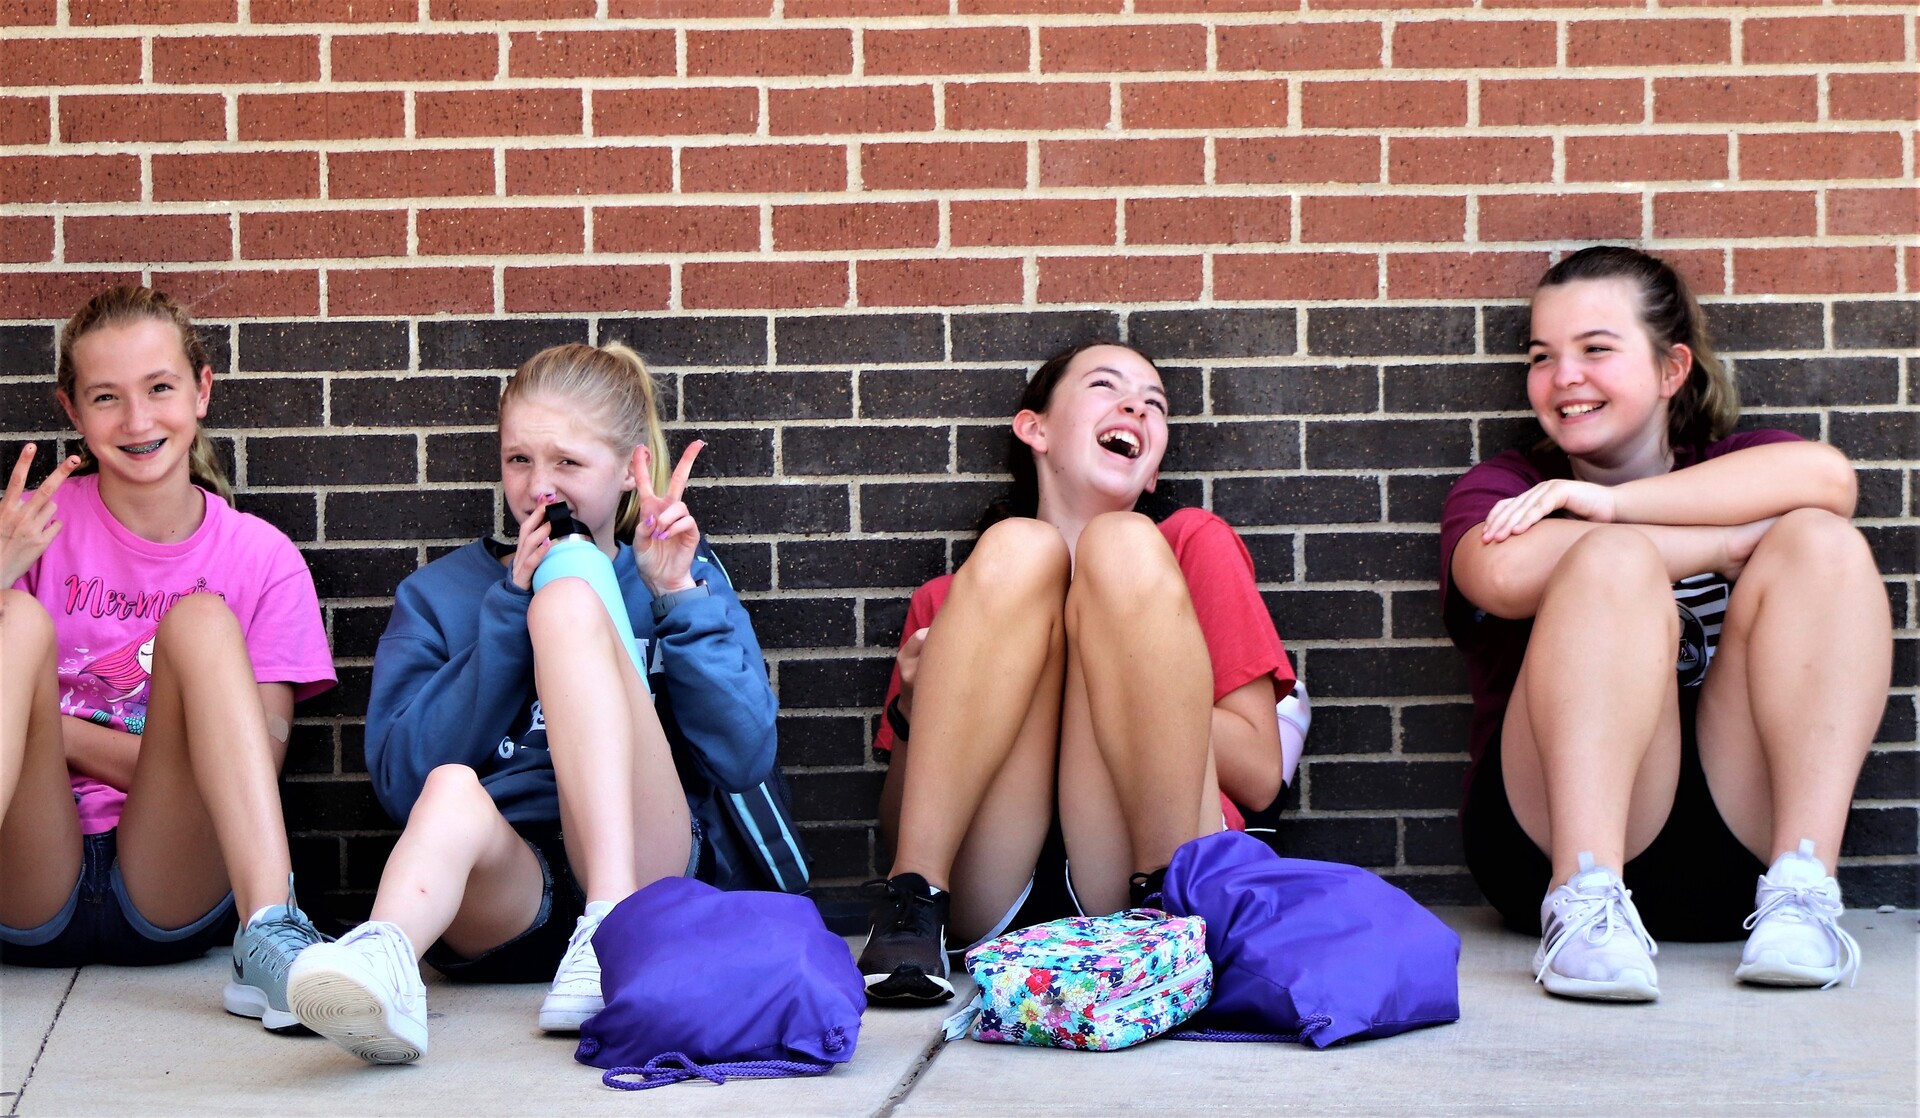 Four young girls sitting against a brick wall, smiling and laughing